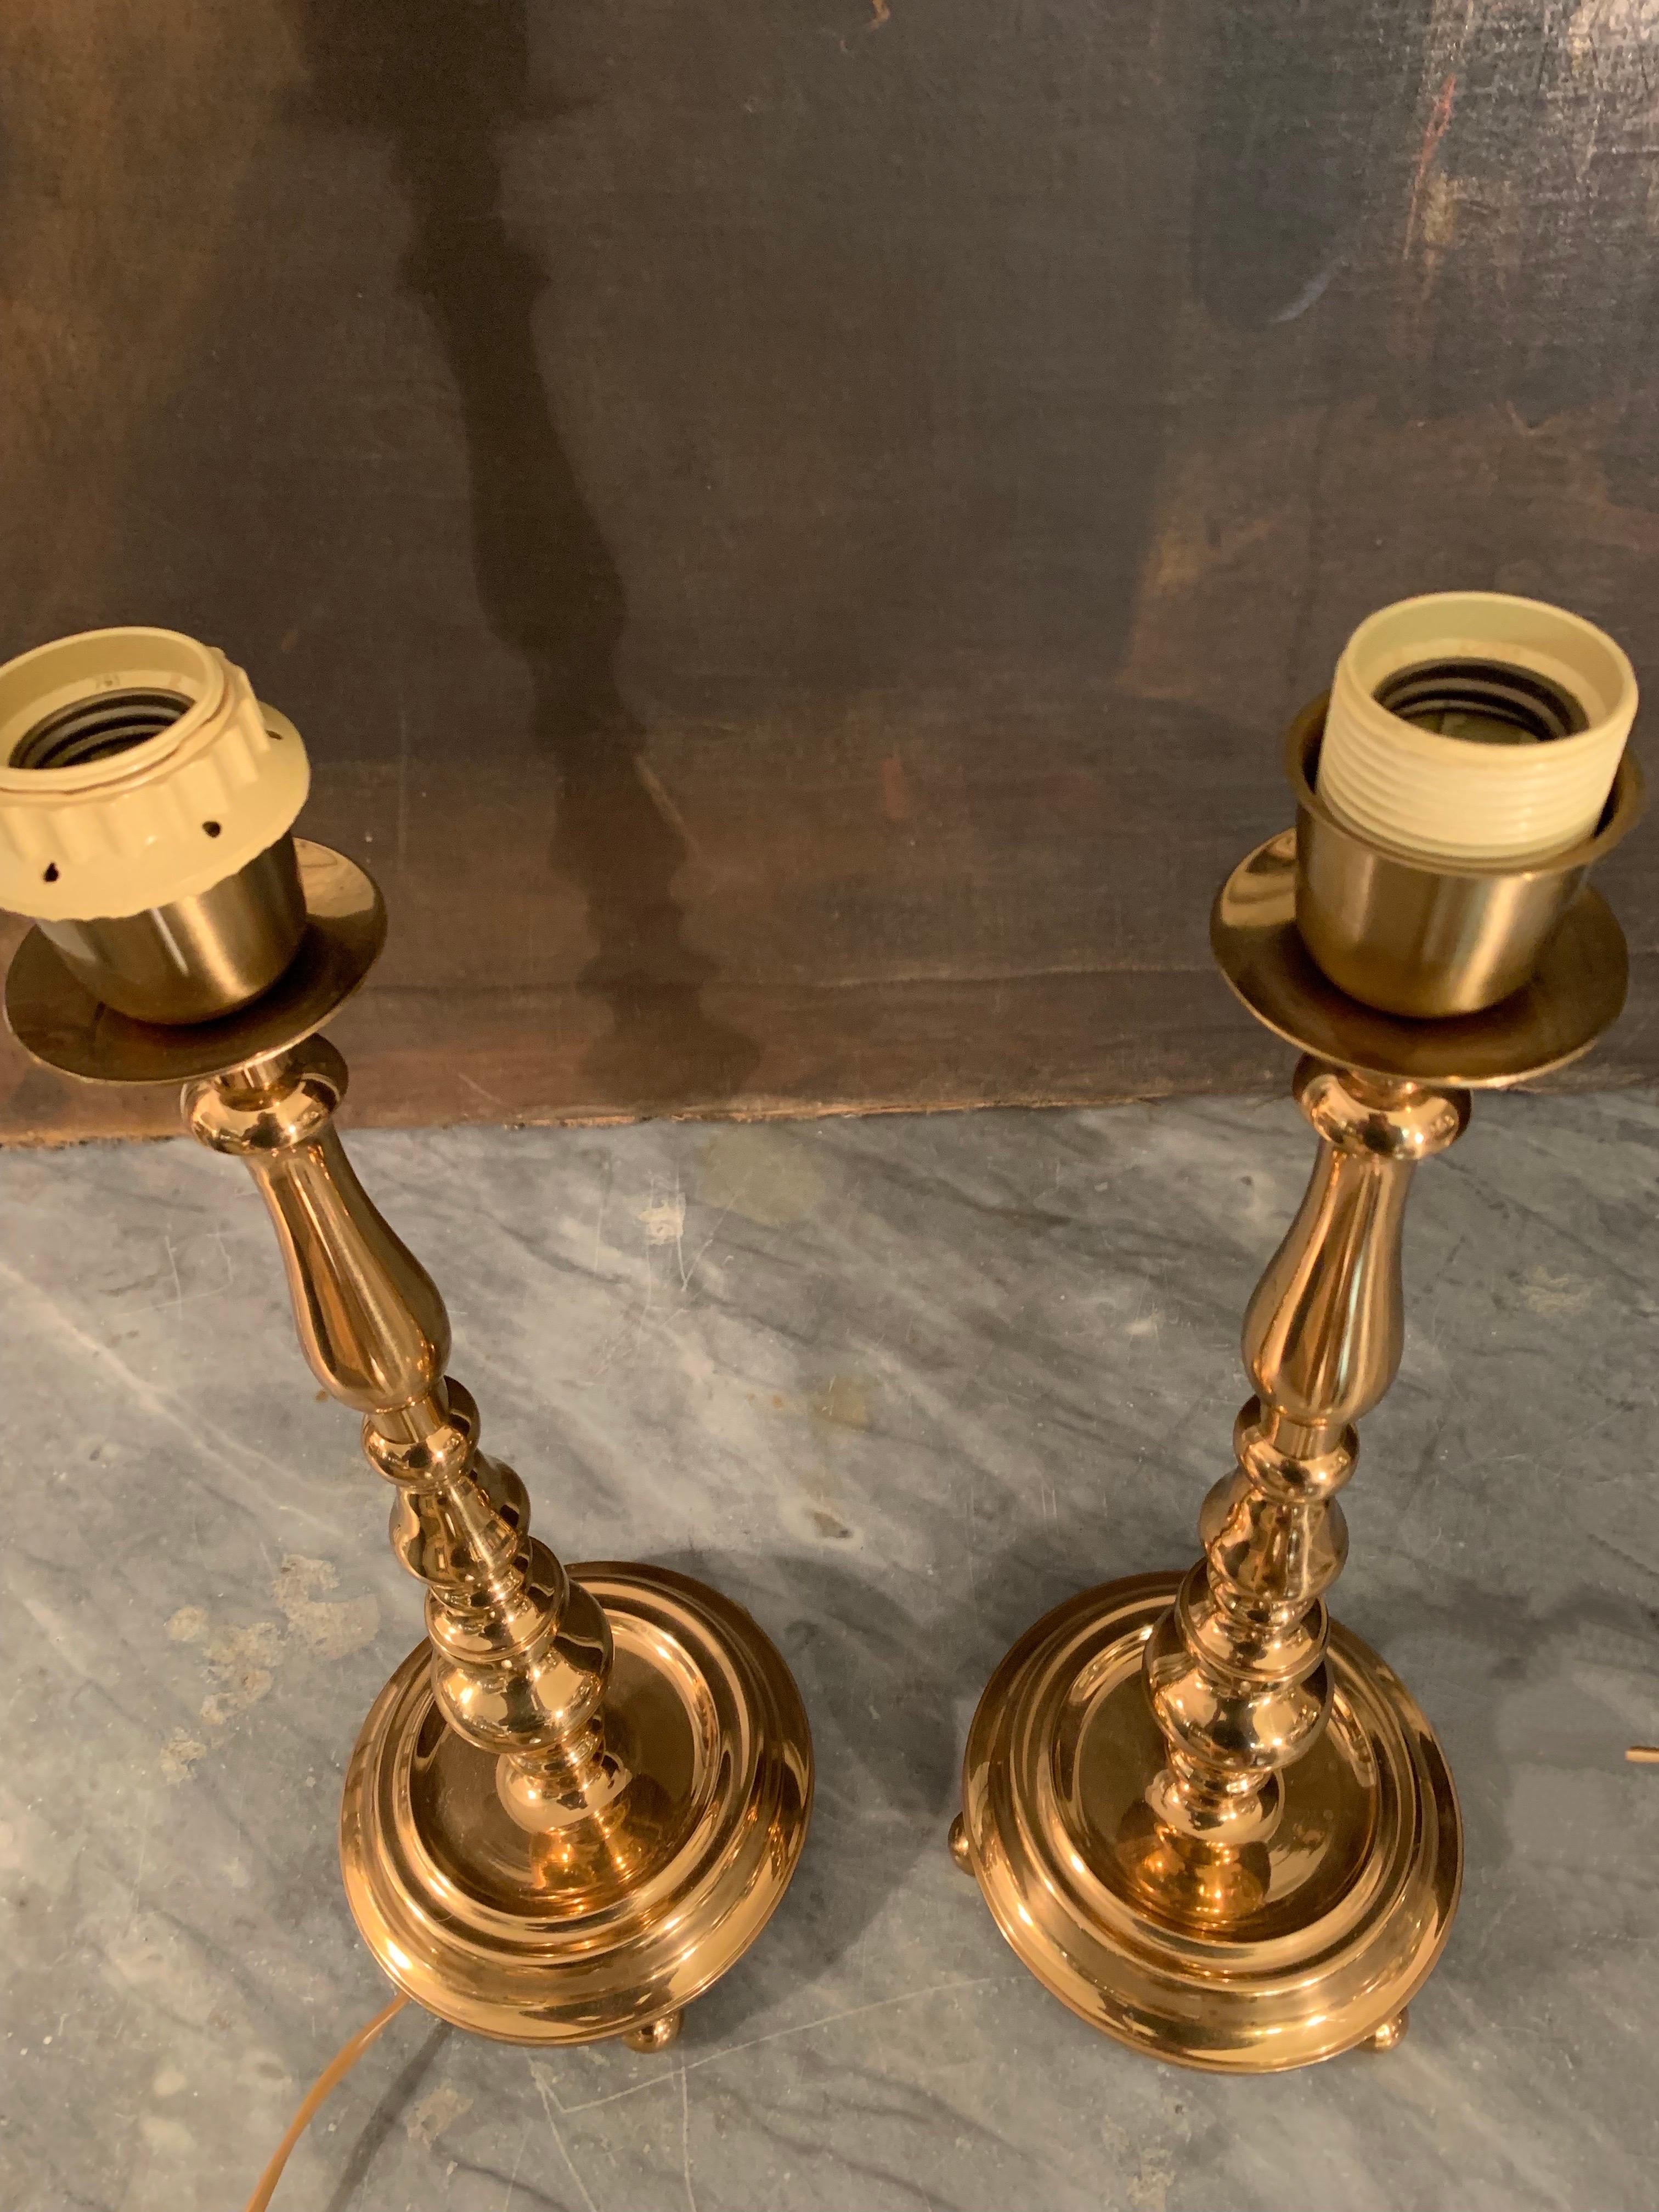 A pair of Swedish lamps, in Renaissance style in solid and polished brass, round base supported by brass balls, are prepared for use in the US, the lampshades are burlap and recently manufactured.